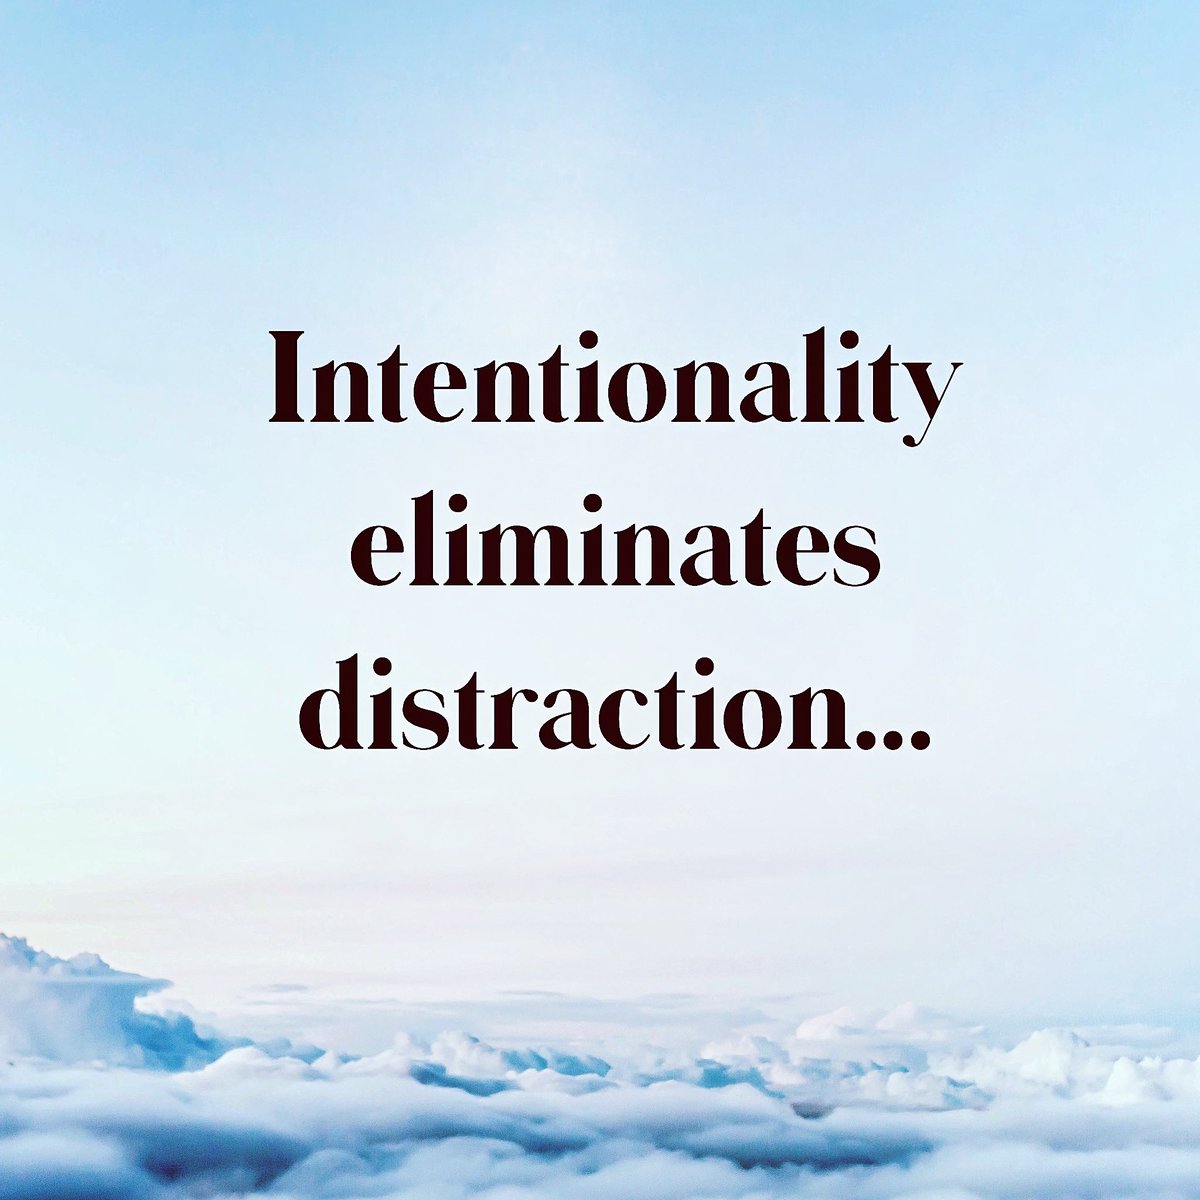 Let us remain intentional about our choices…